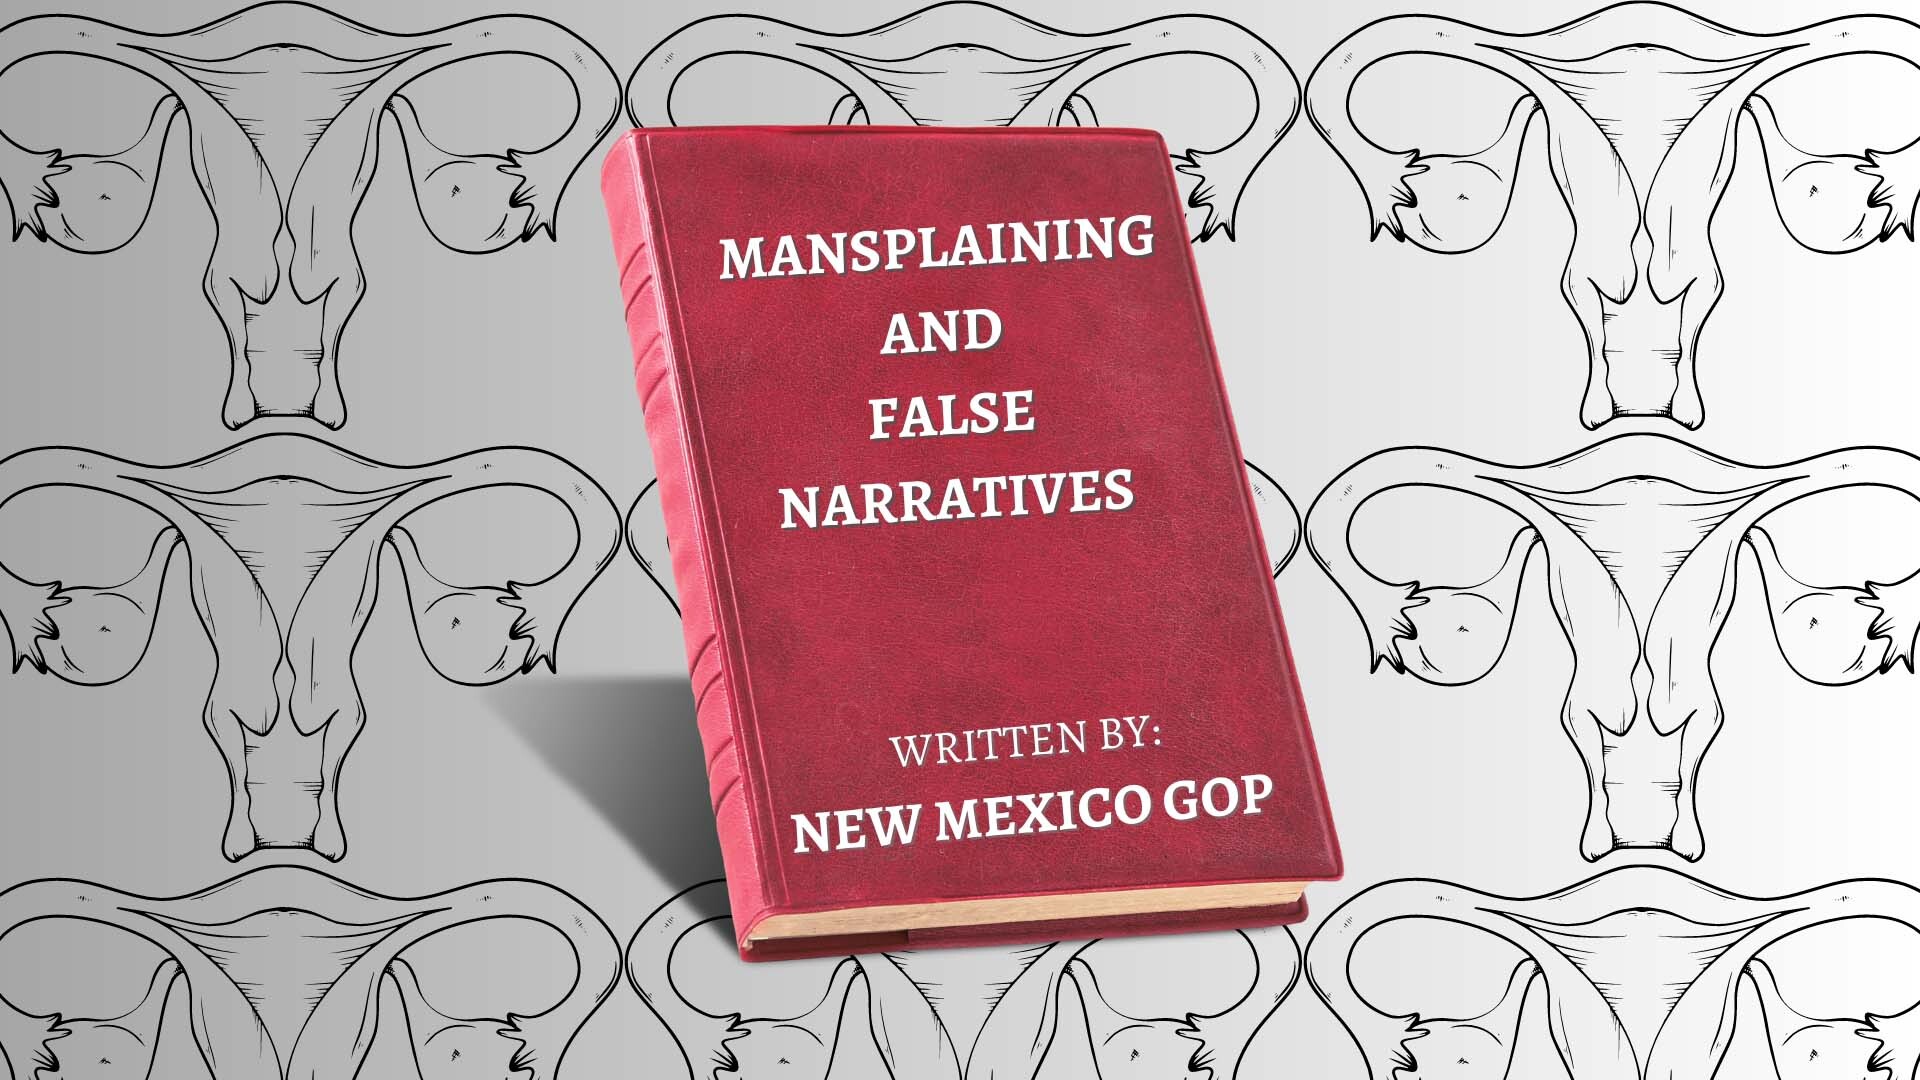 Red book with the title Manspalining and False Narratives, written by the NM GOP. Background is a tiled illustration of uteruses and fallopian tubes.